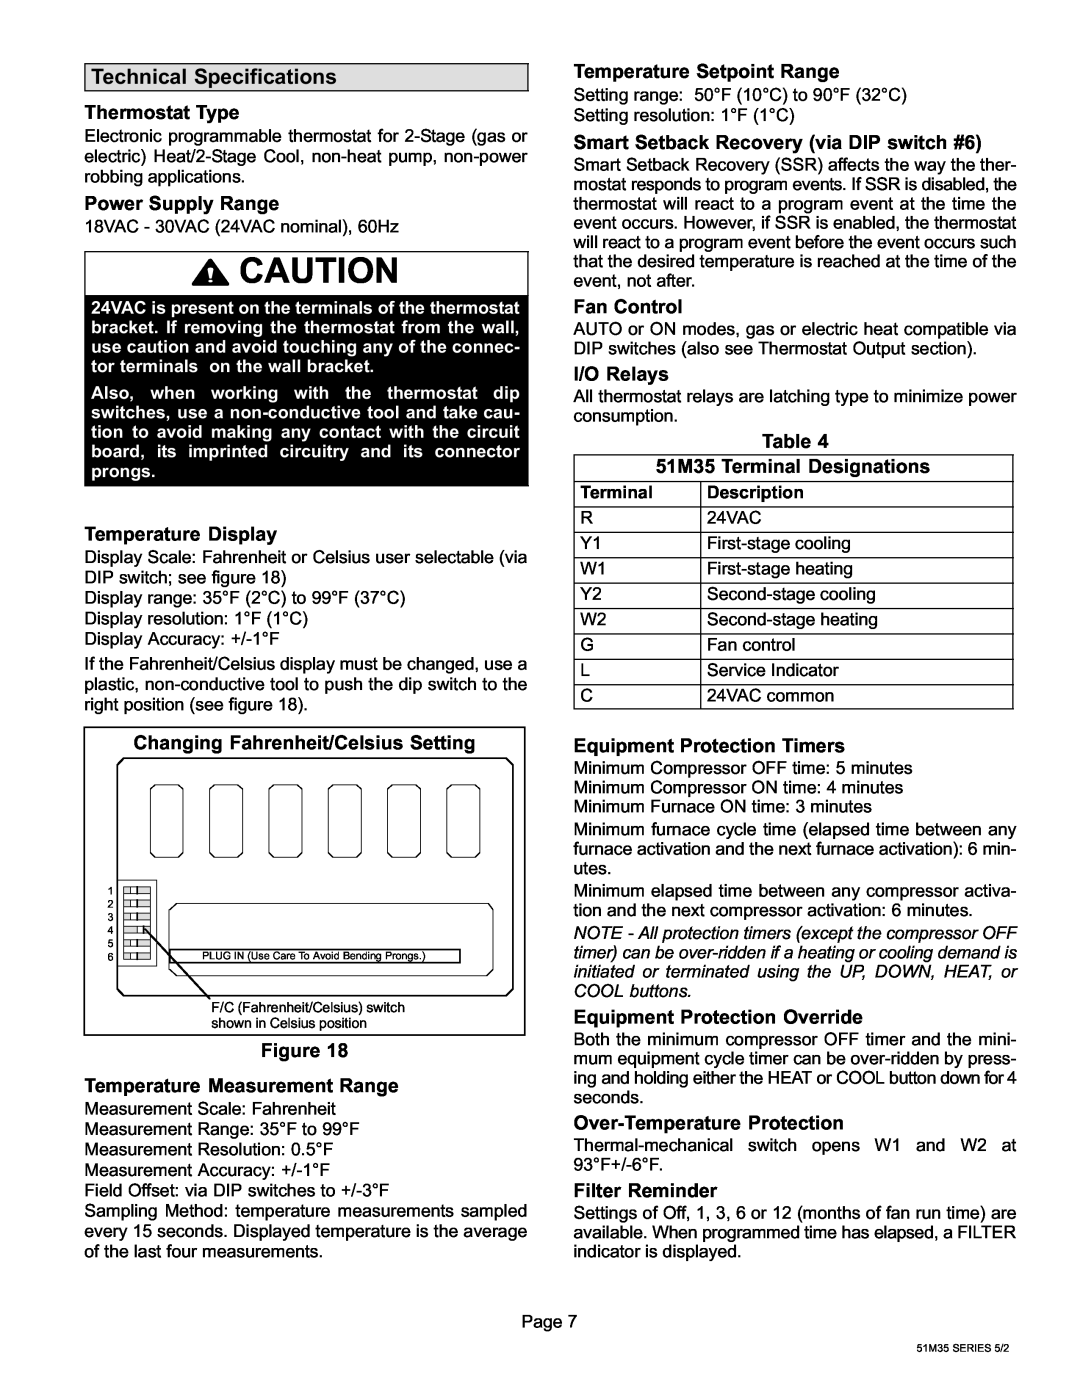 Lennox International Inc 51M37 operation manual Technical Specifications, Thermostat Type 